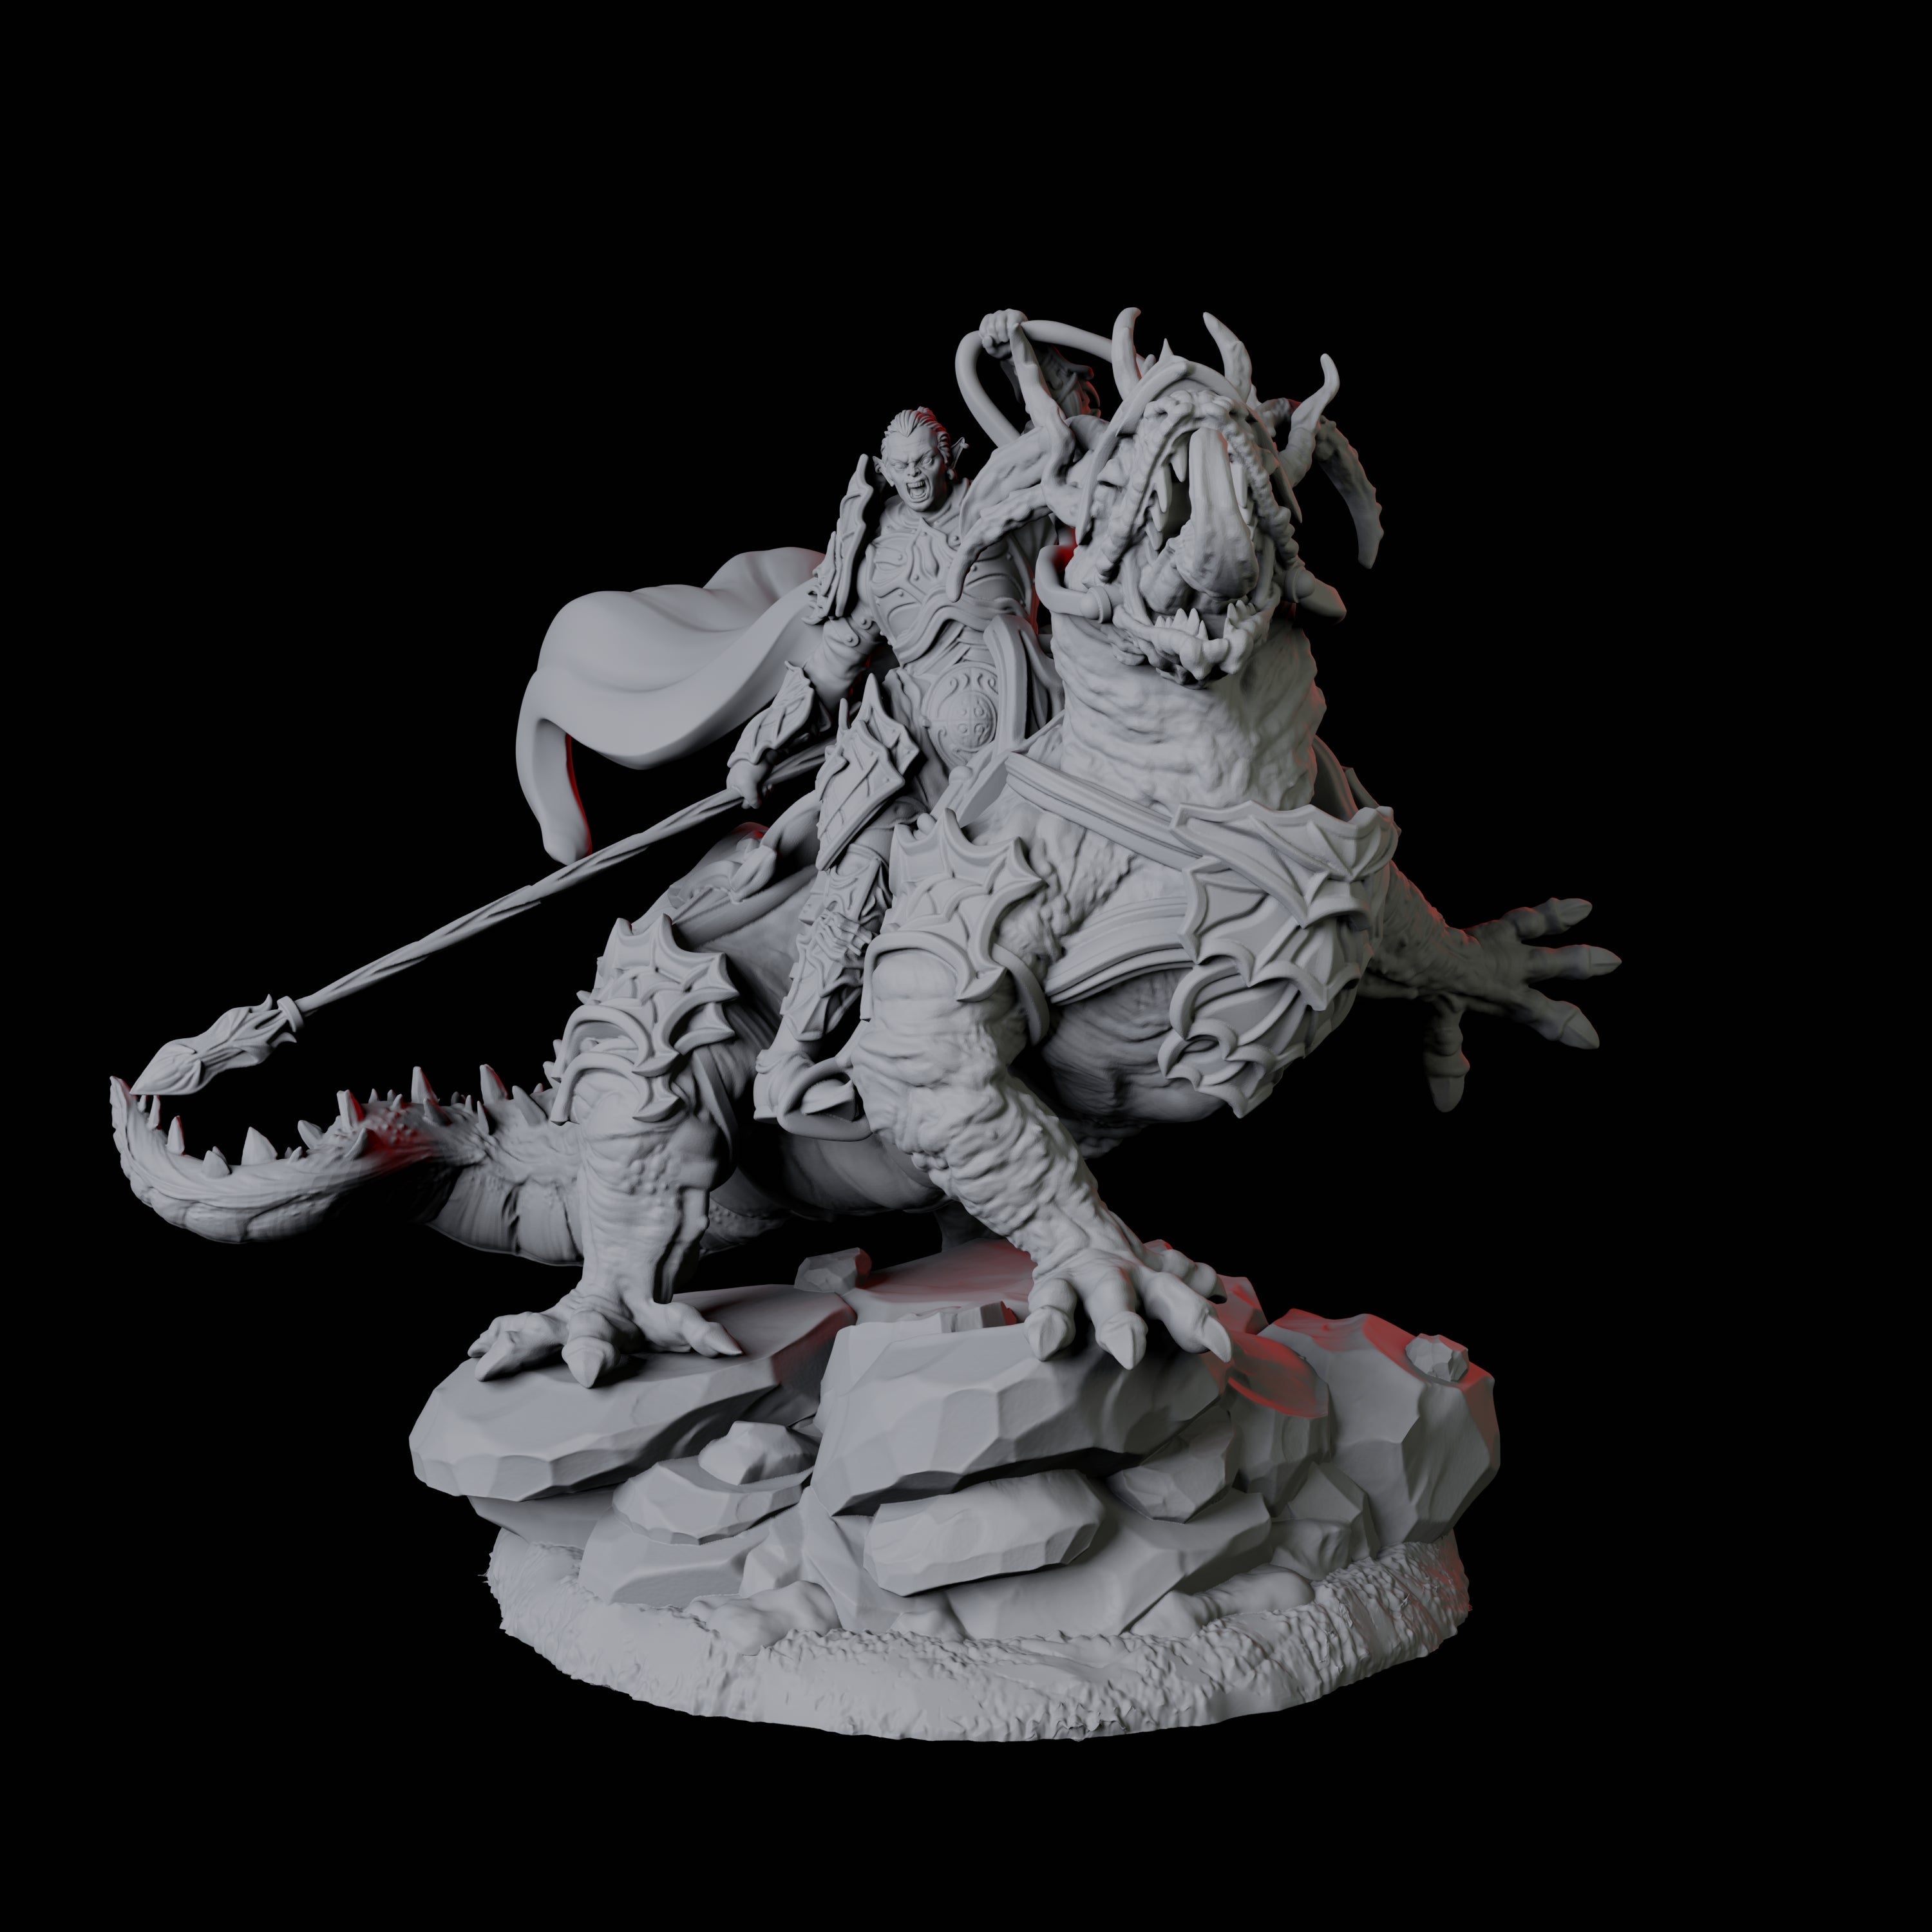 Fighter mounted on Giant Lizard A Miniature for Dungeons and Dragons, Pathfinder or other TTRPGs